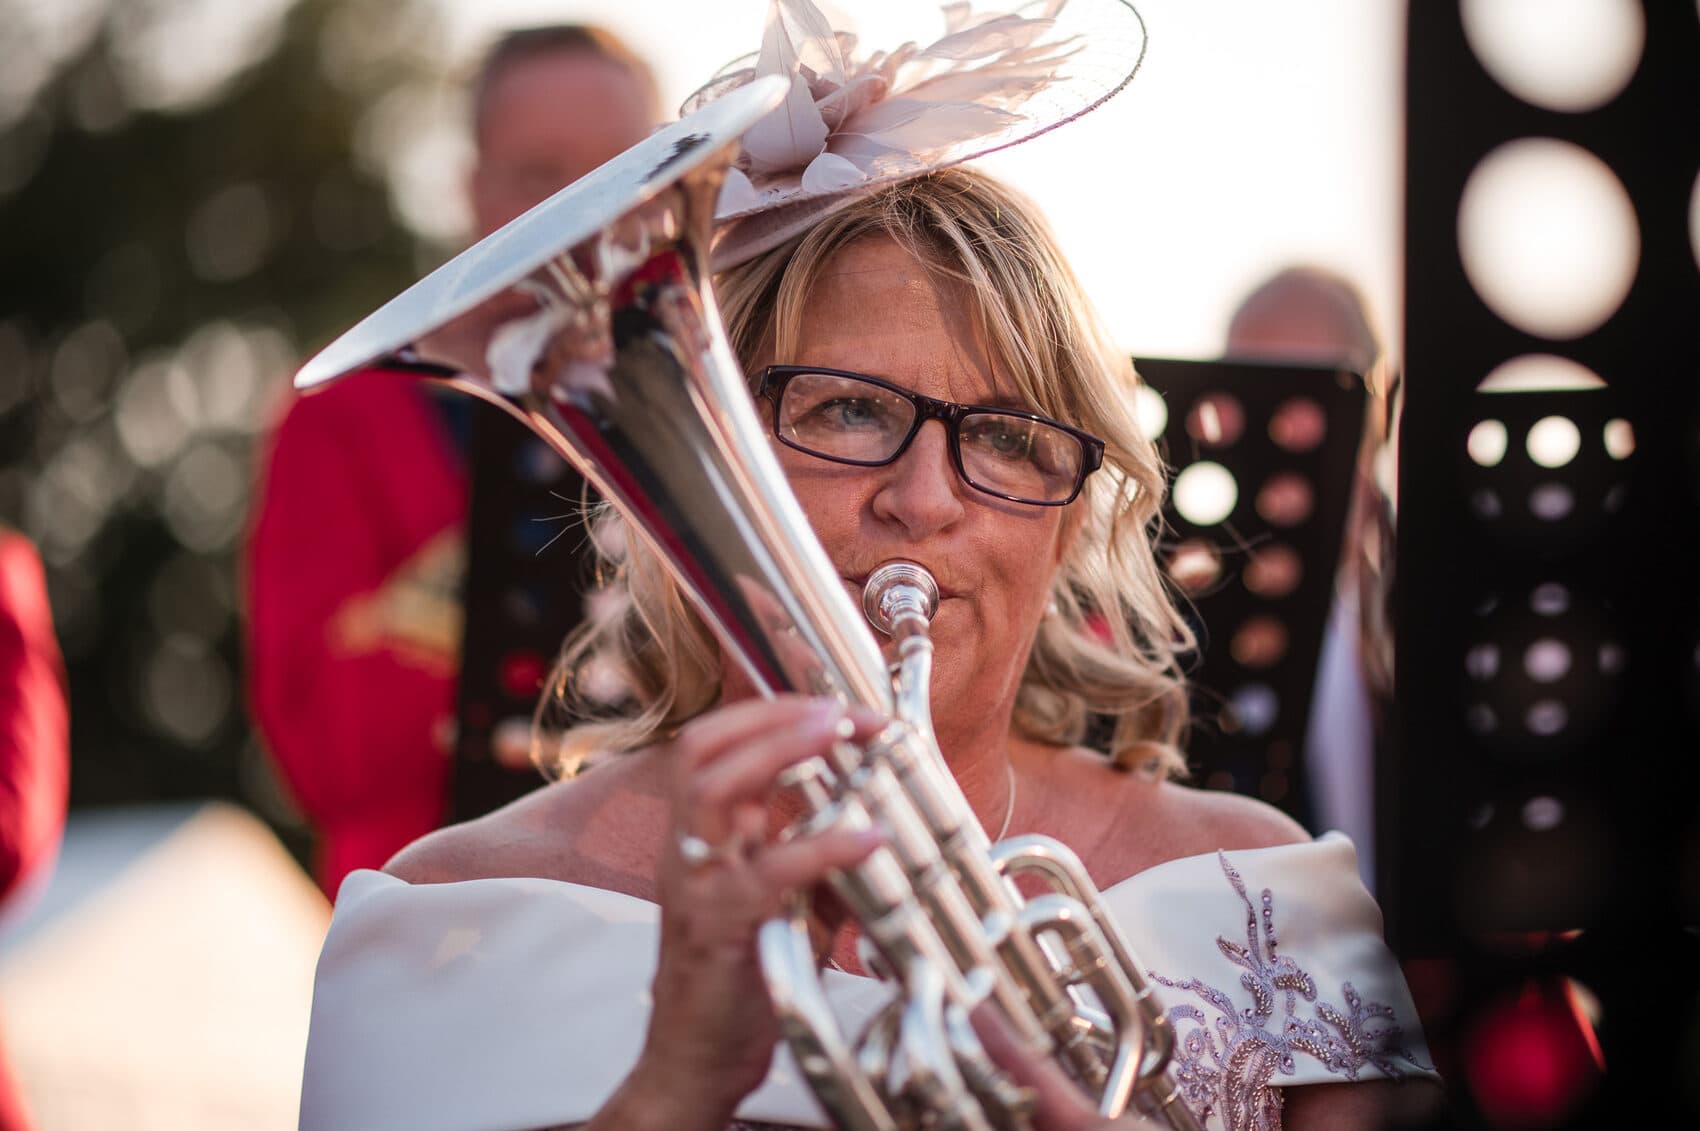 Mother of the bride playing a tuba